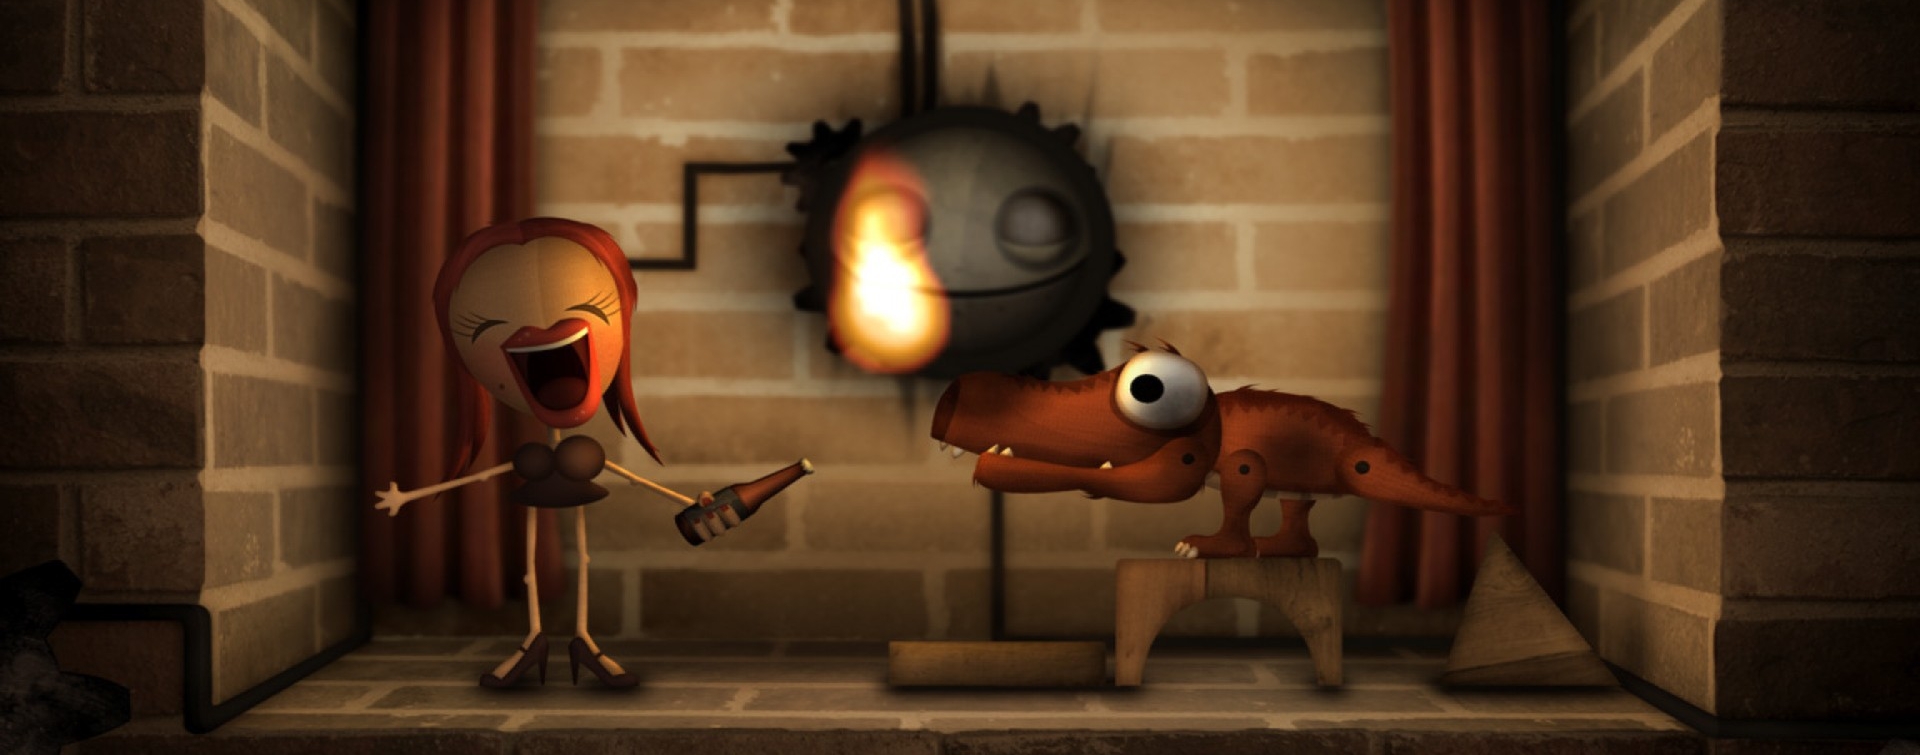 Epic Games is offering Tomorrow Corporation's crafting game satire Little Inferno for free today. Image via PC Gamer.